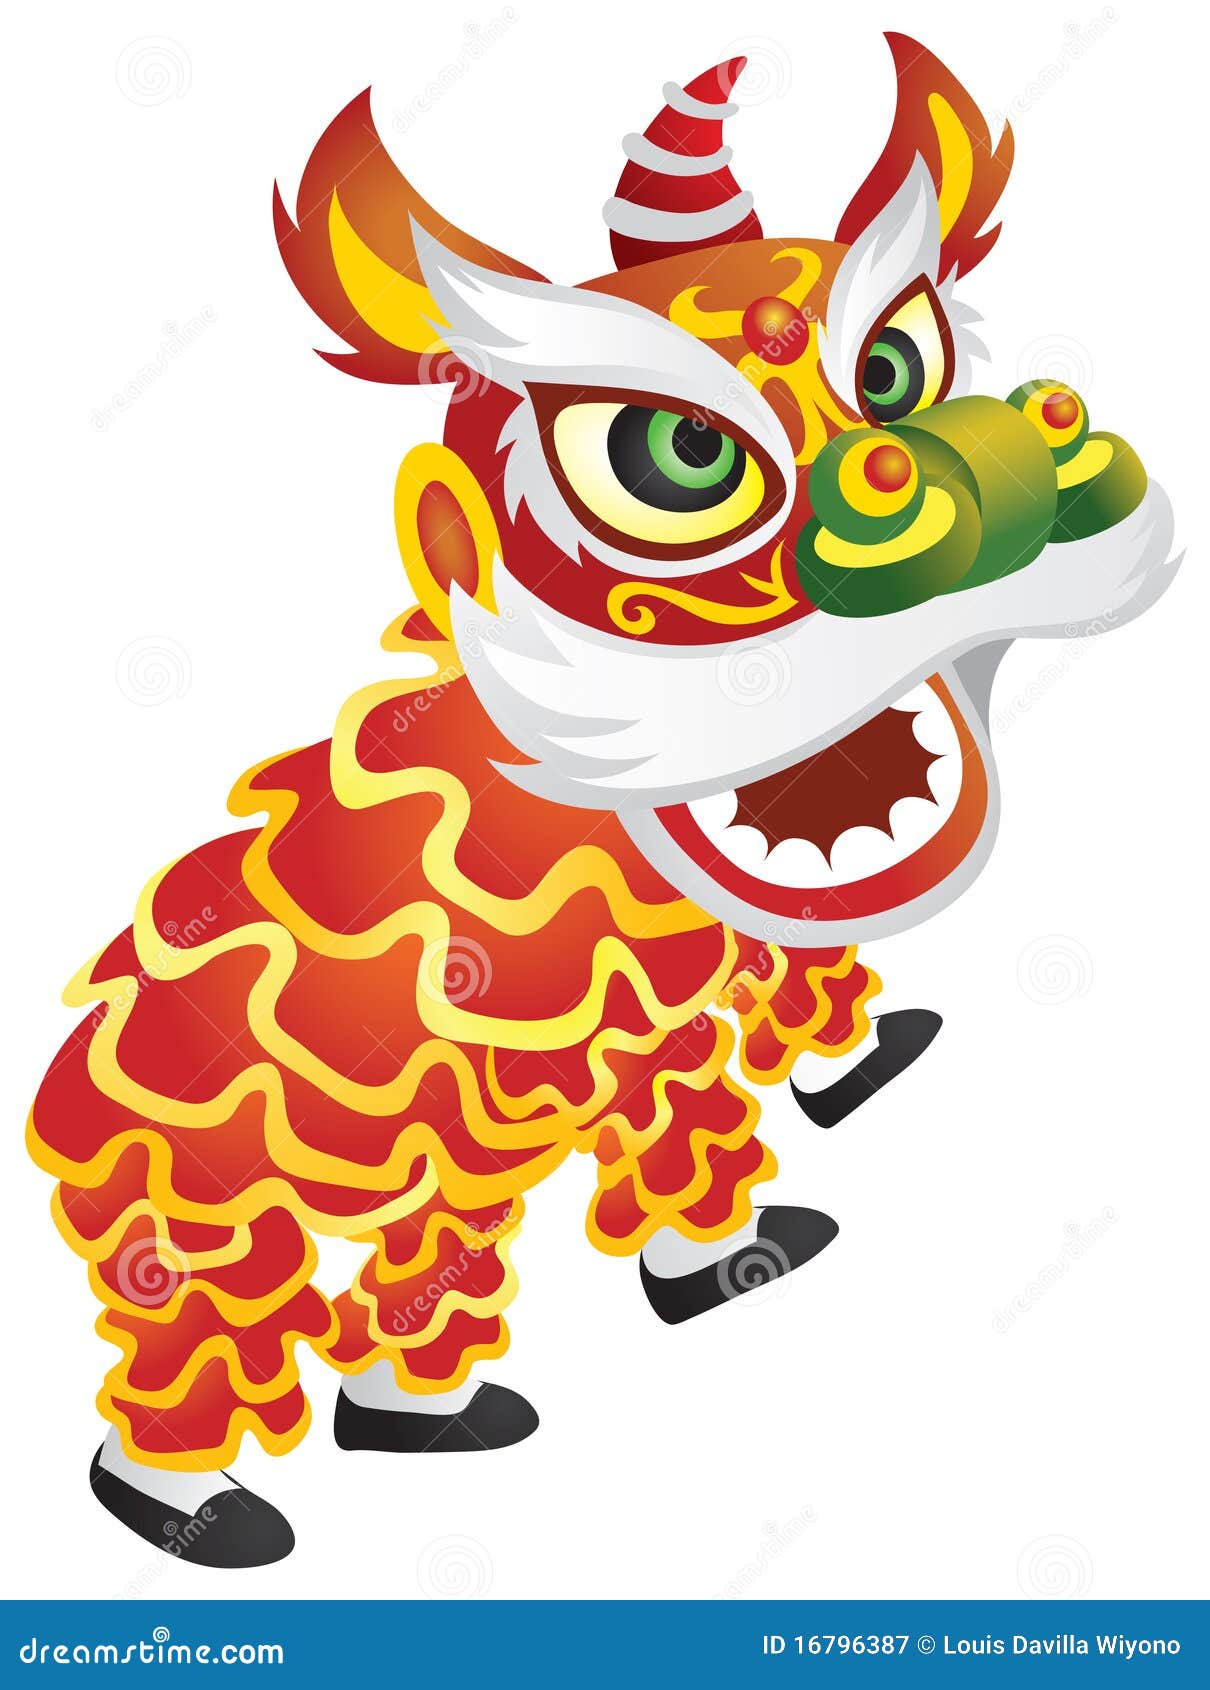 Chinese Dragon Dance stock vector. Illustration of eastern - 16796387